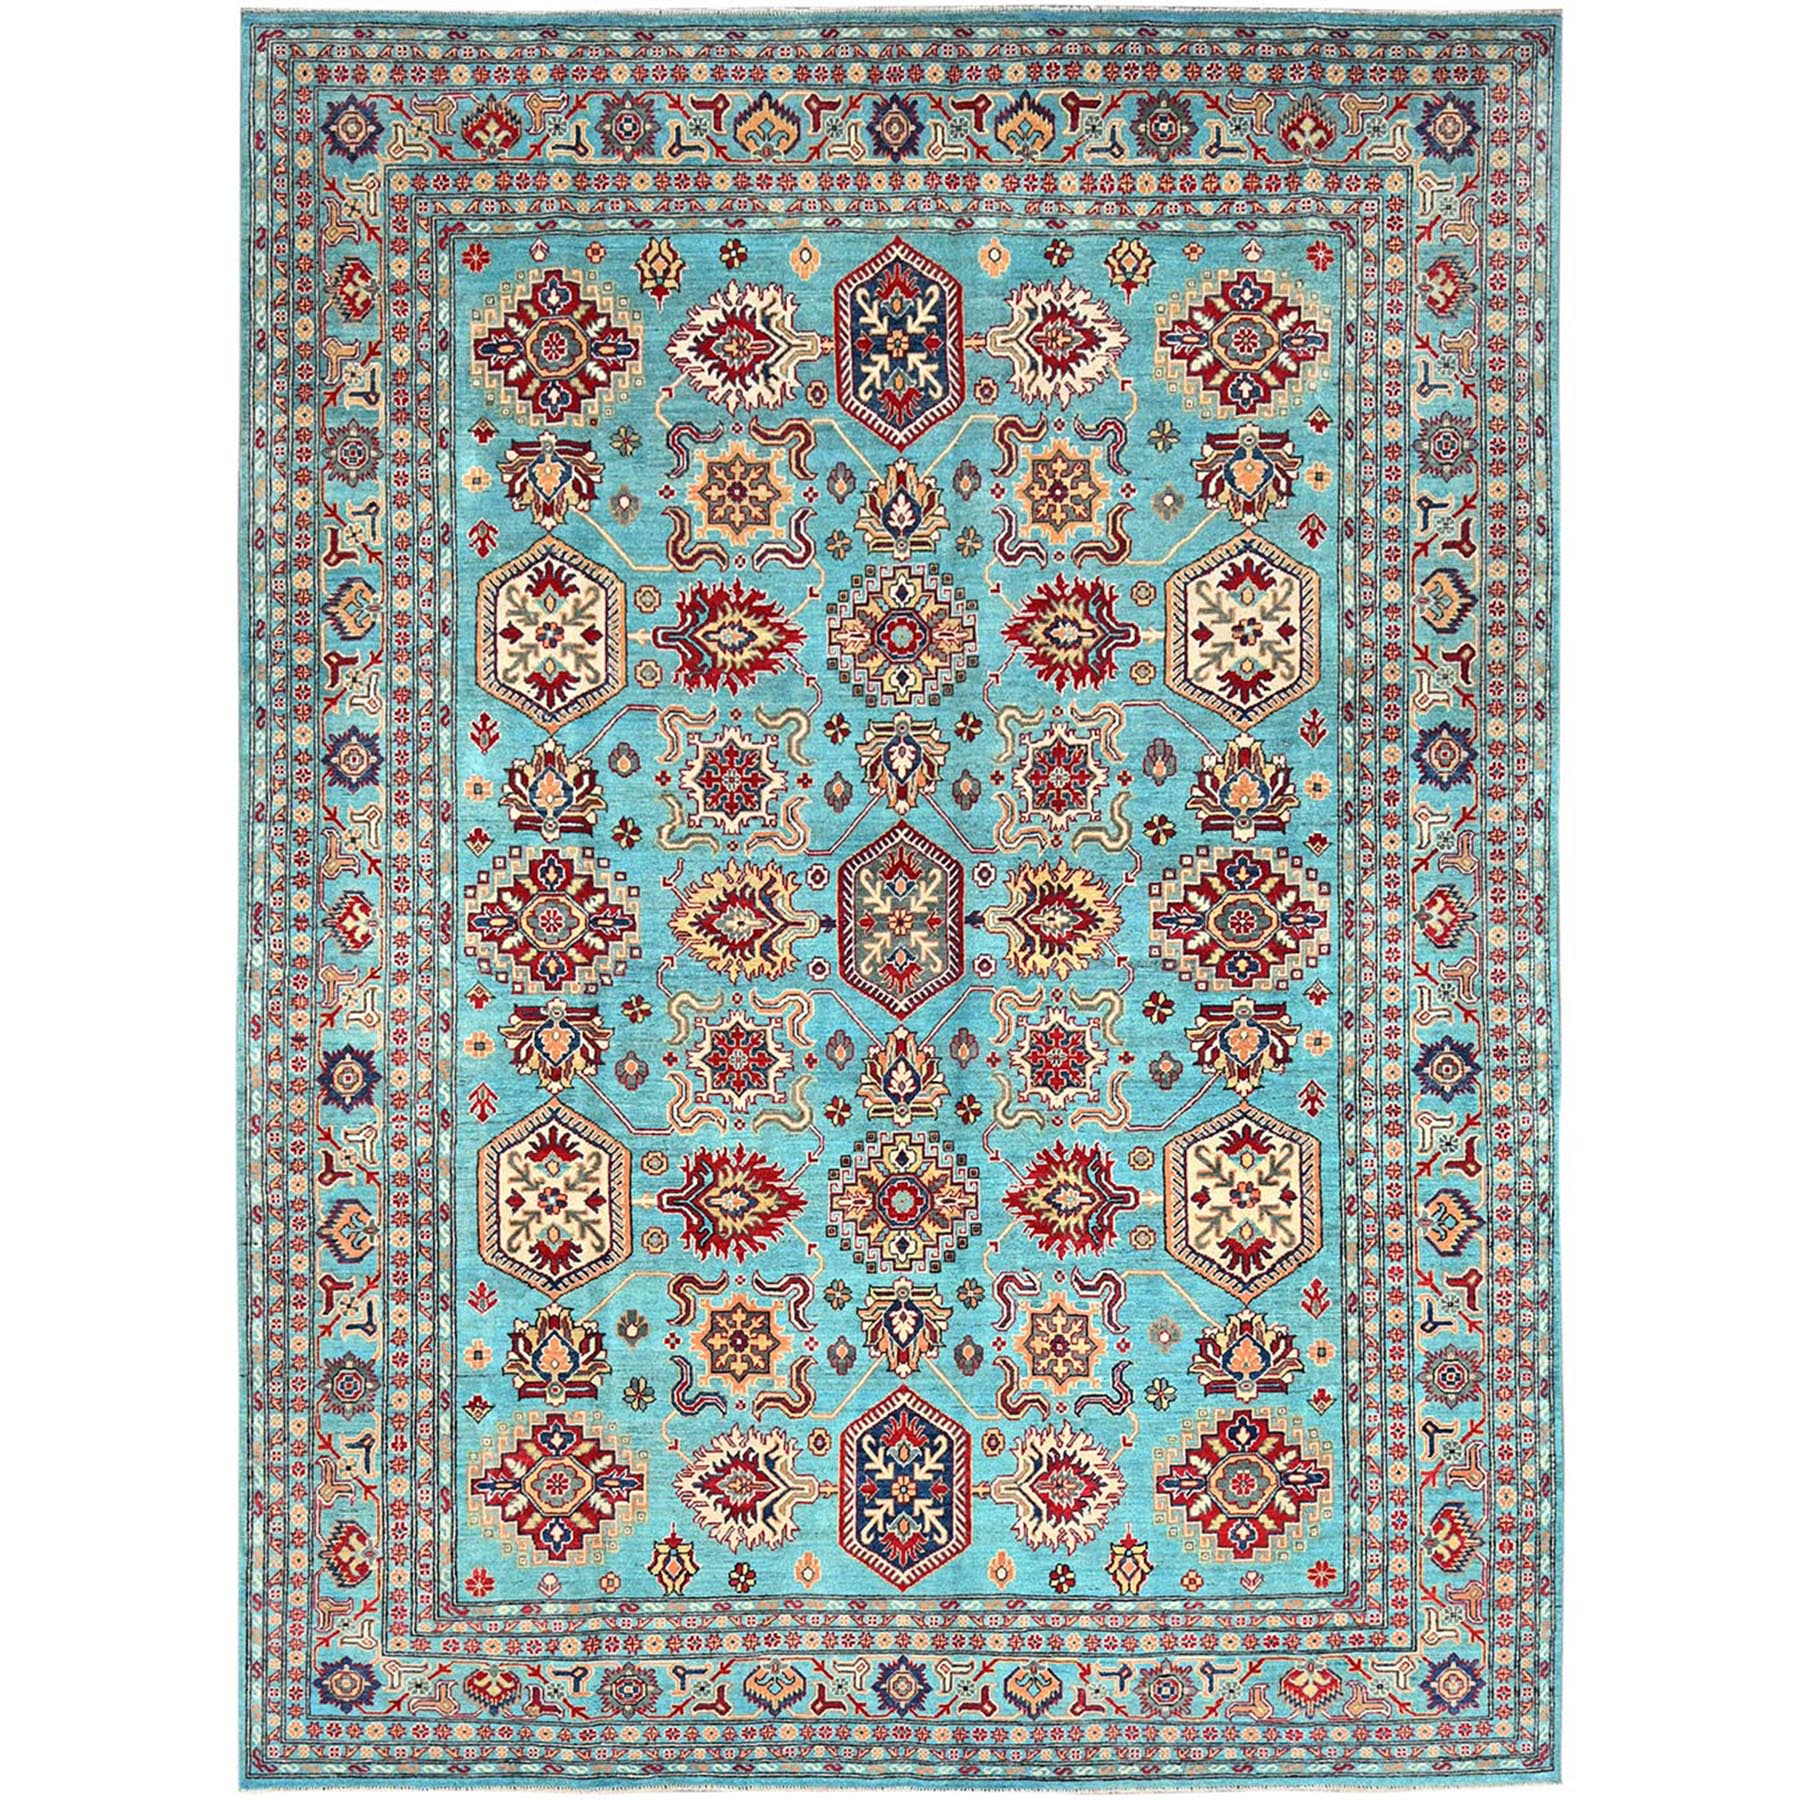 Fanfare Blue, Kazak With Geometric Pattern, Vegetable Dyes and Densely Woven, 100% Wool Hand Knotted Oriental Rug